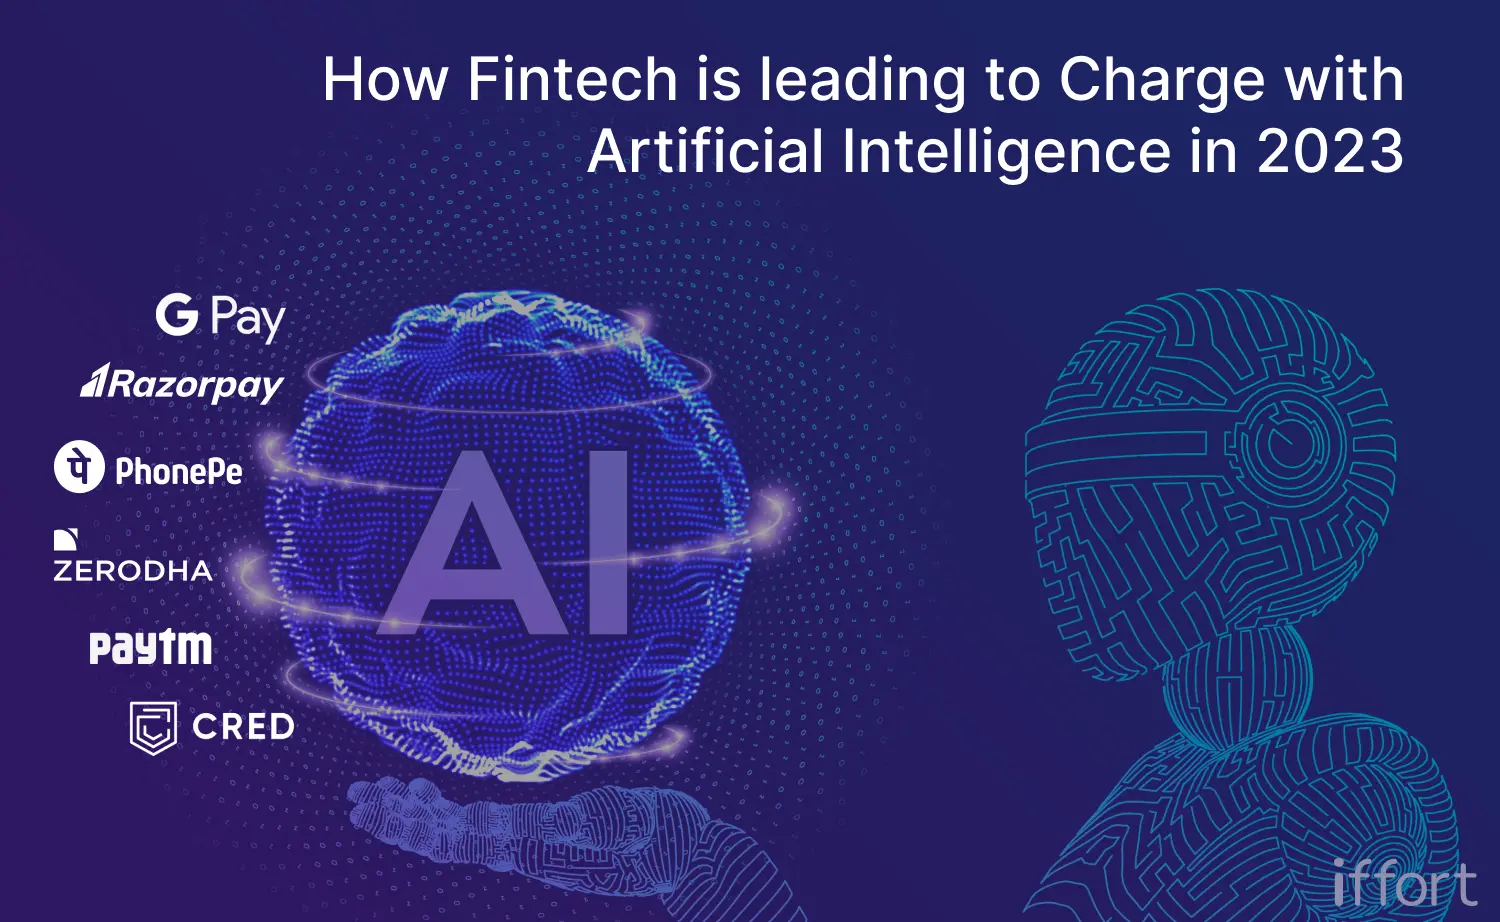 5 ways in which AI will impact the Fintech industry in 2023